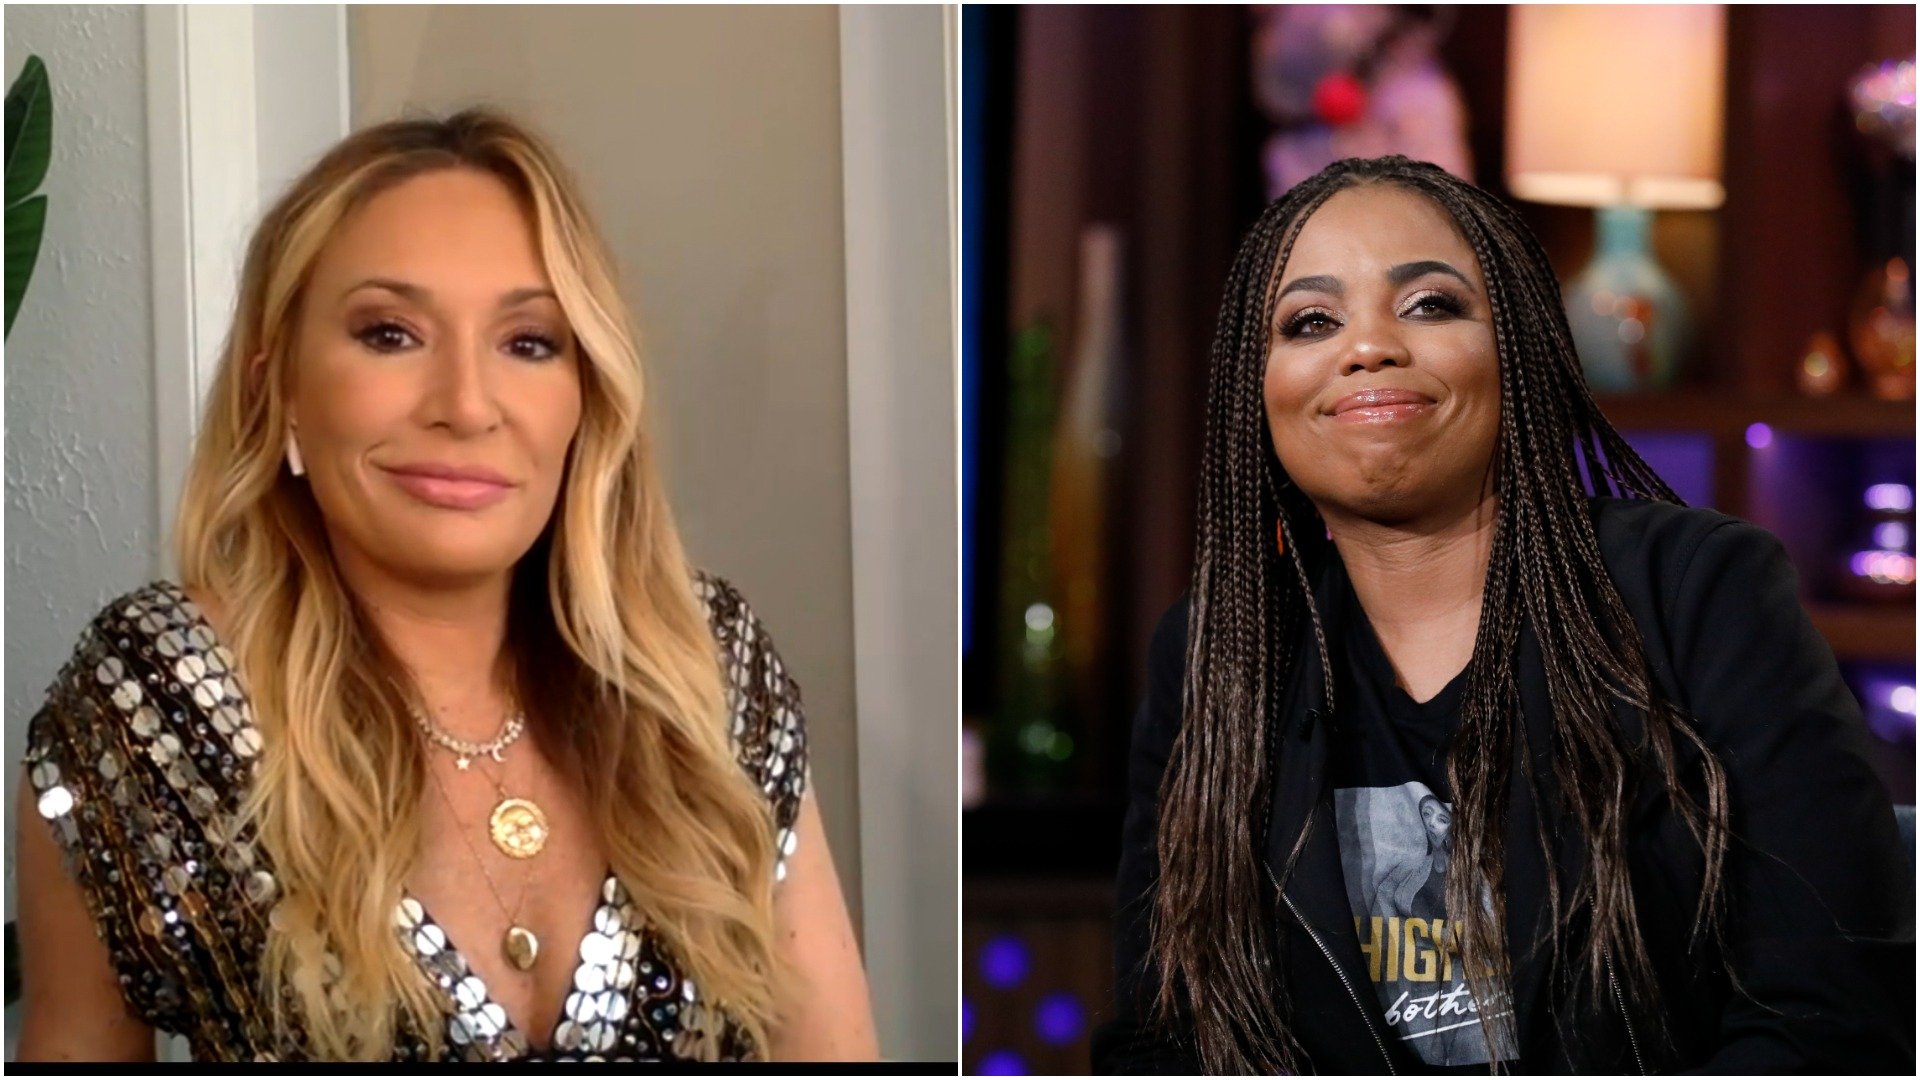 Jemele Hill and Kate Chastain had tension on Below Deck